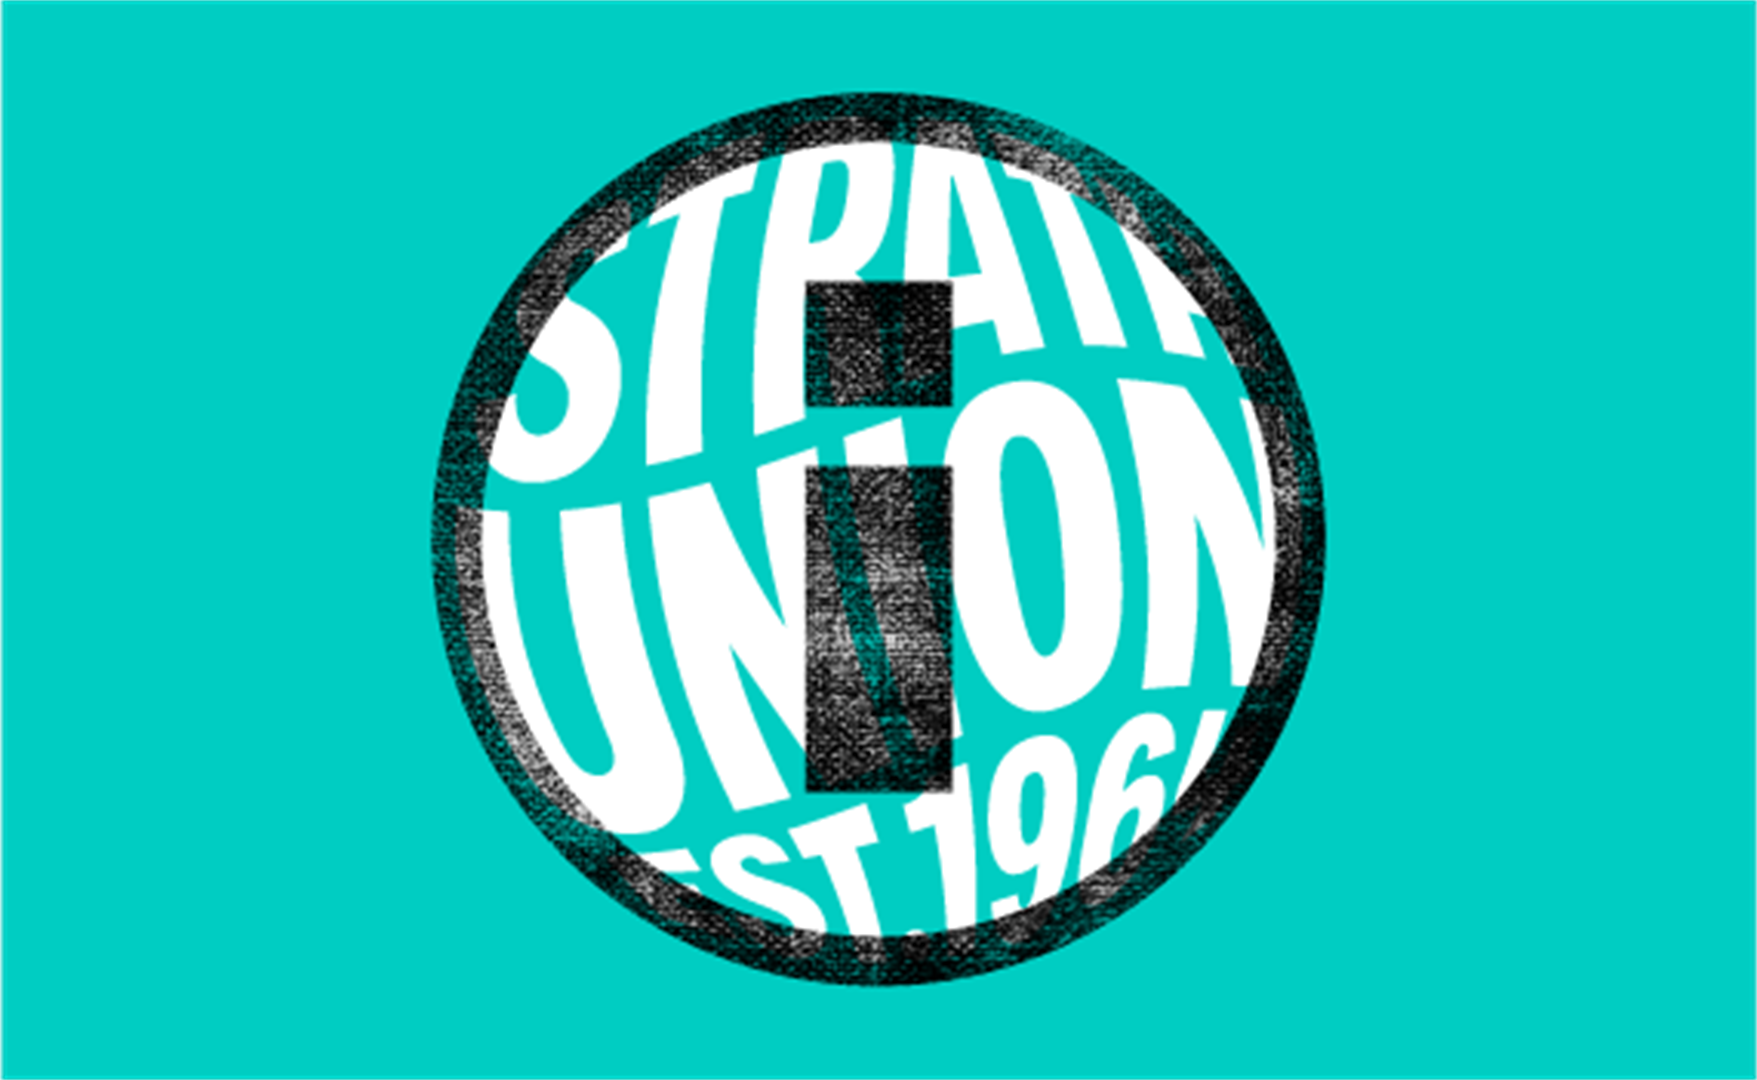 Access the Constitution, Policies and Agreements of Strath Union as agreed democratically by our student members.